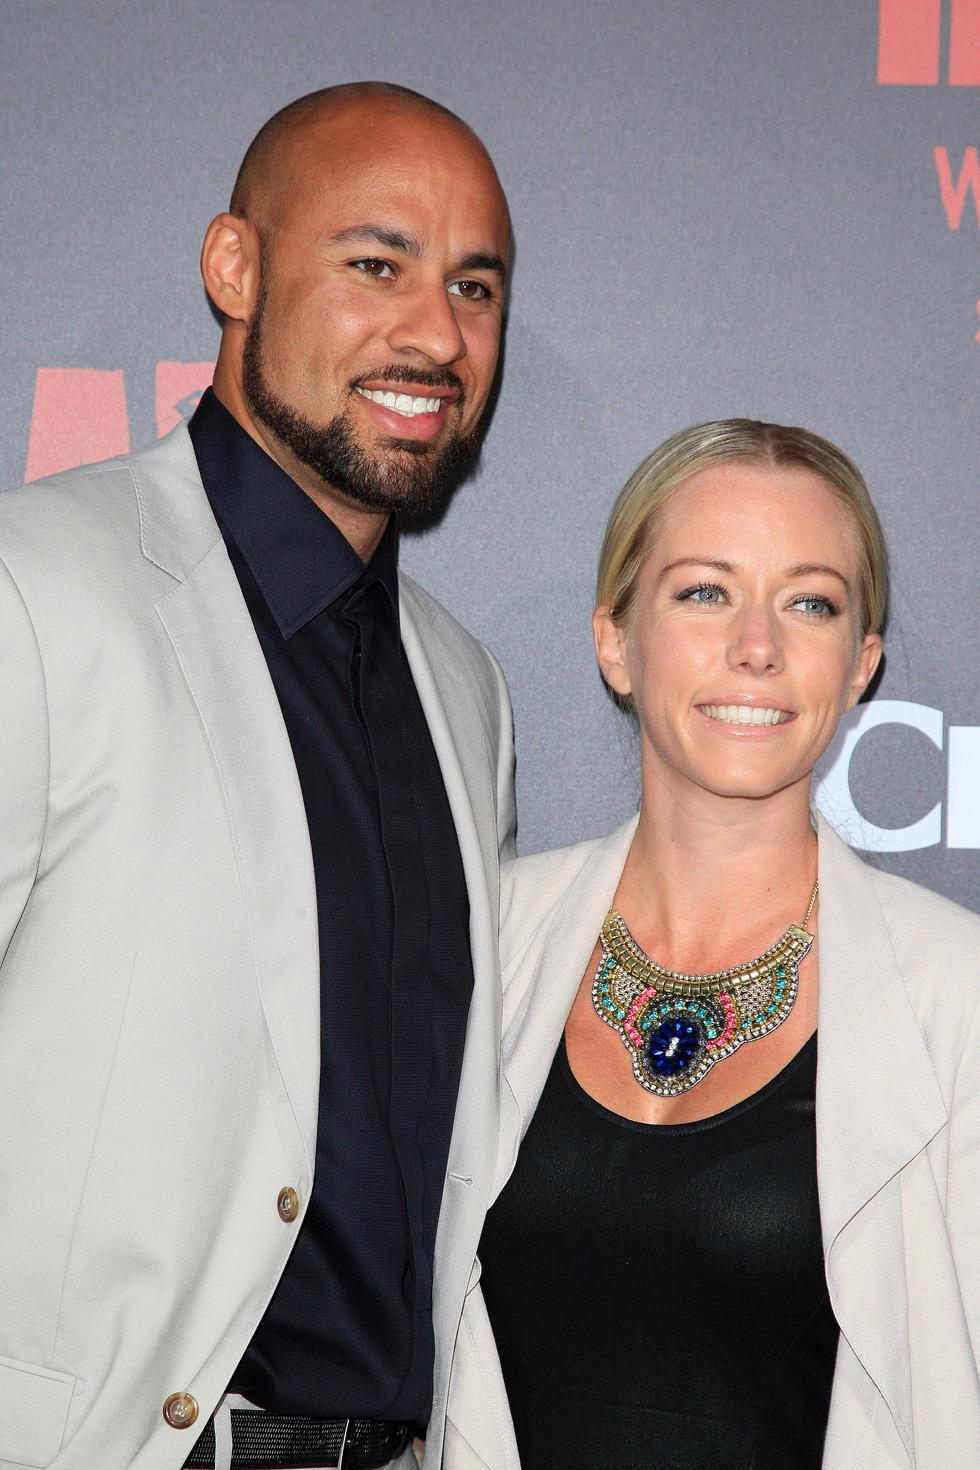 Did Hank Baskett Really Cheat On Kendra Wilkinson With A Transgender Model The Couple Finally